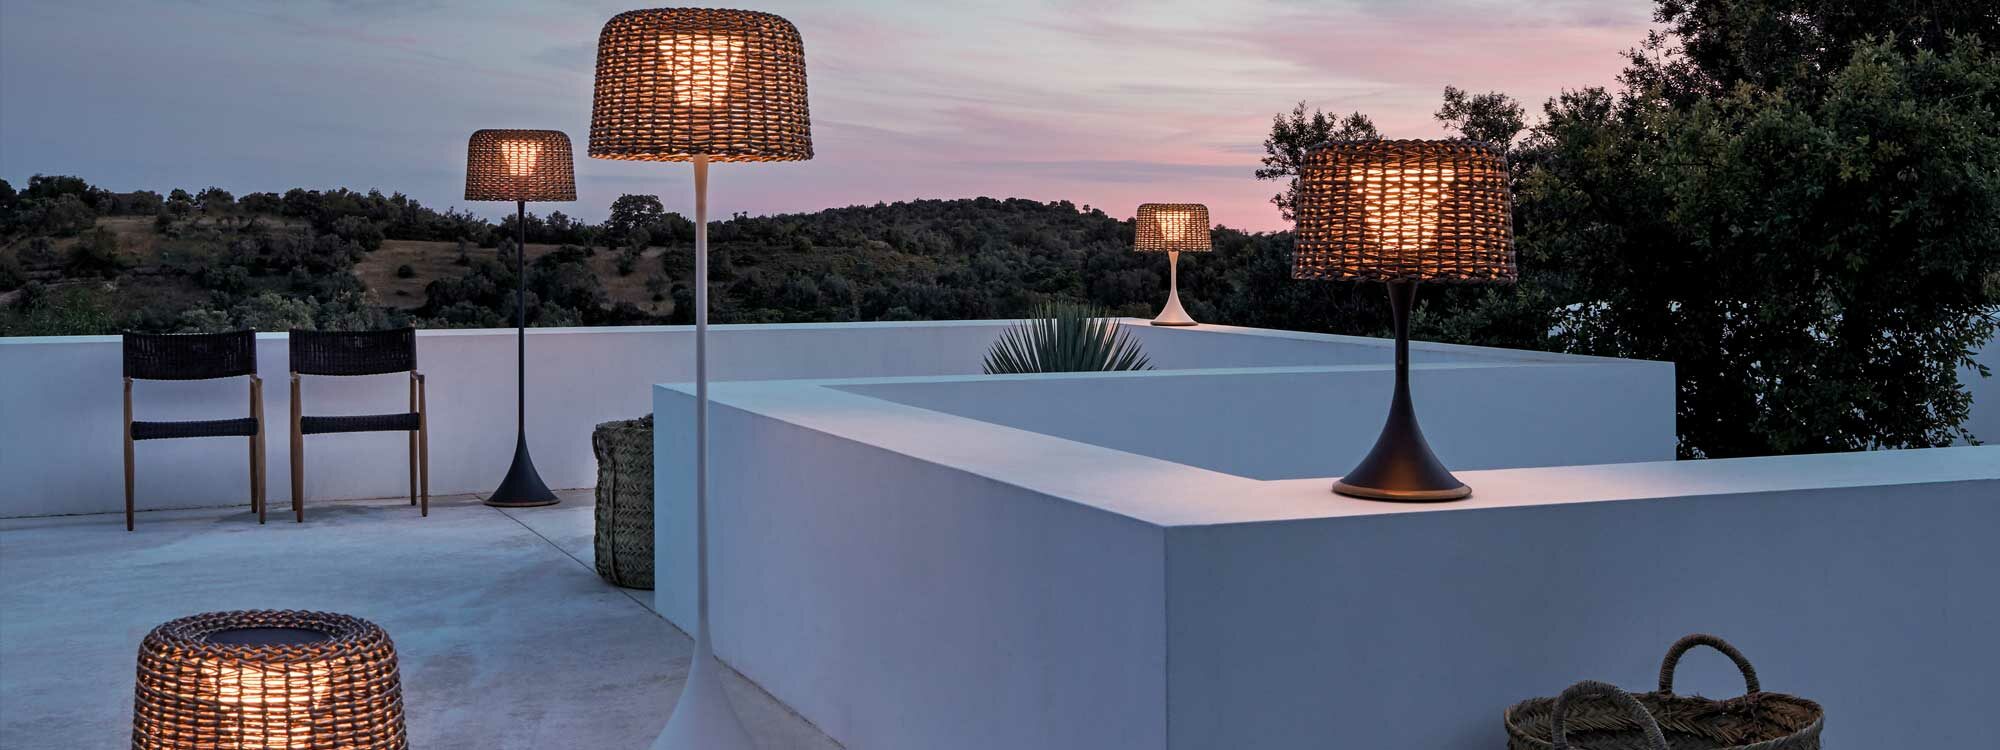 Image of different sizes of Gloster Ambient Mesh table lamps and garden floor lamps on white-washed rooftop at dusk